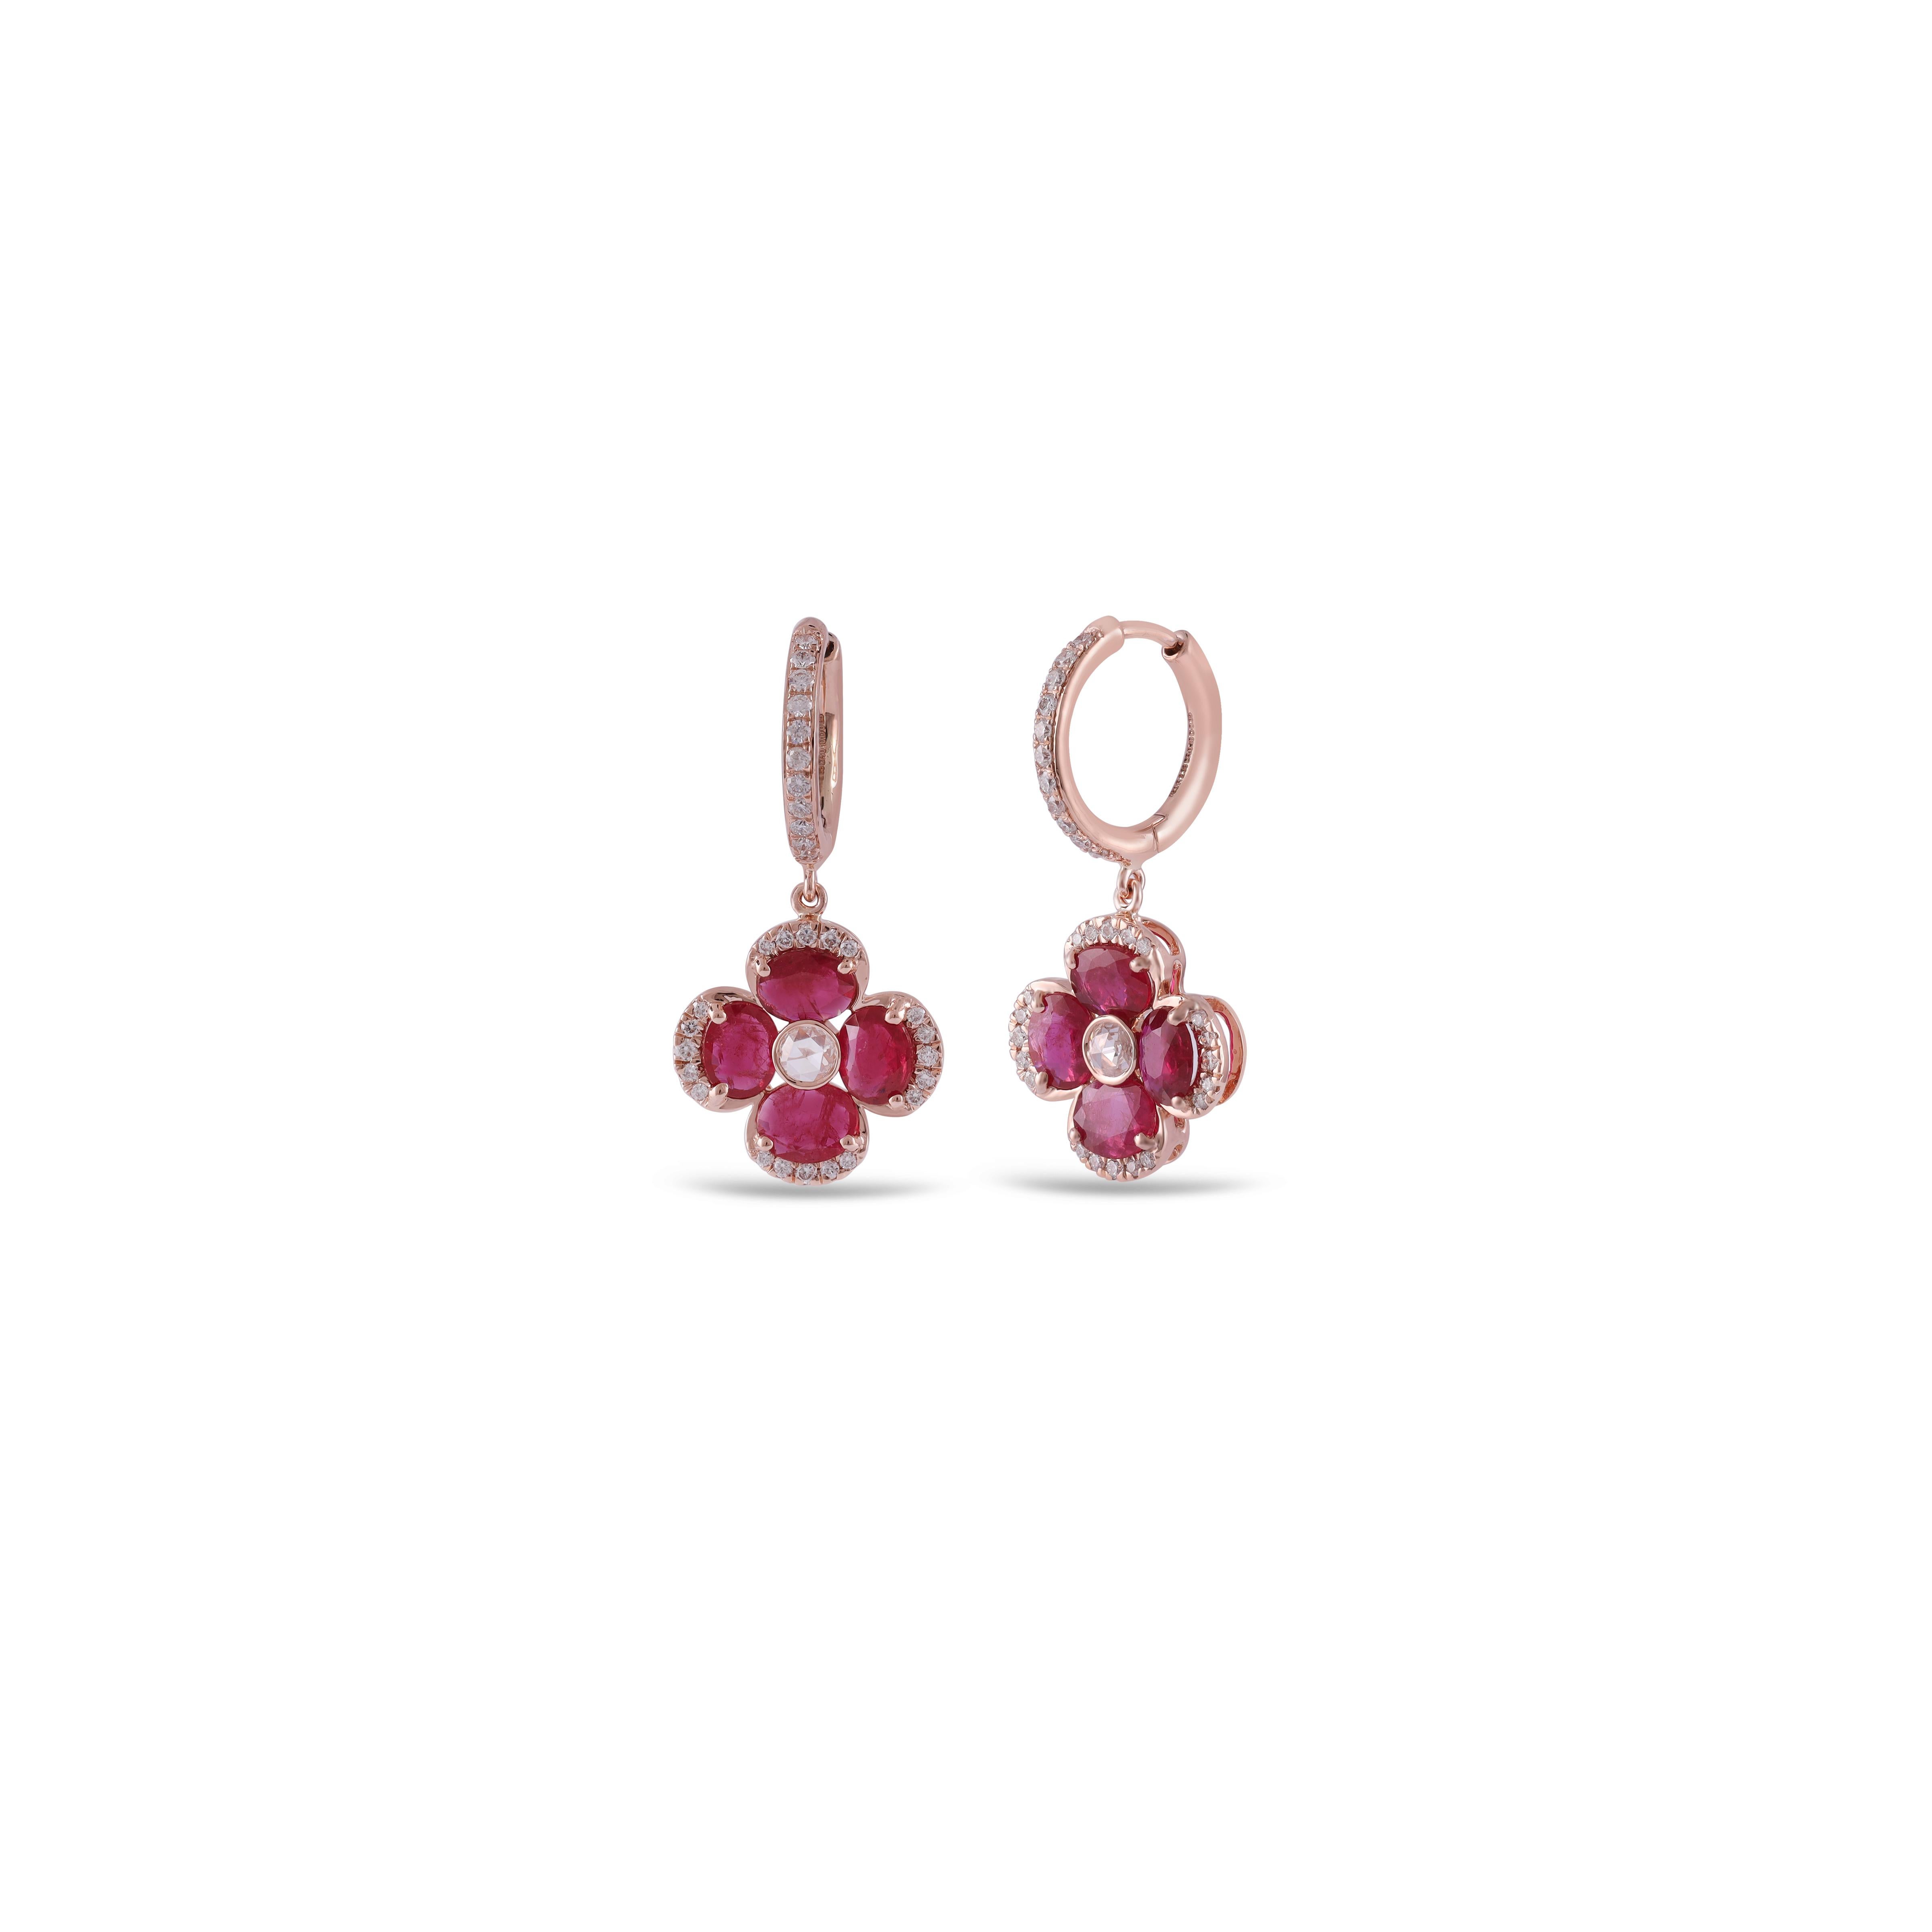 If you are looking for Ruby earrings, this is the ultimate find, (2.33 carats) of the finest Ruby color is the focal point. Perfectly matched in color, size, and transparency. The color is what you want . The diamonds  surrounding the gorgeous